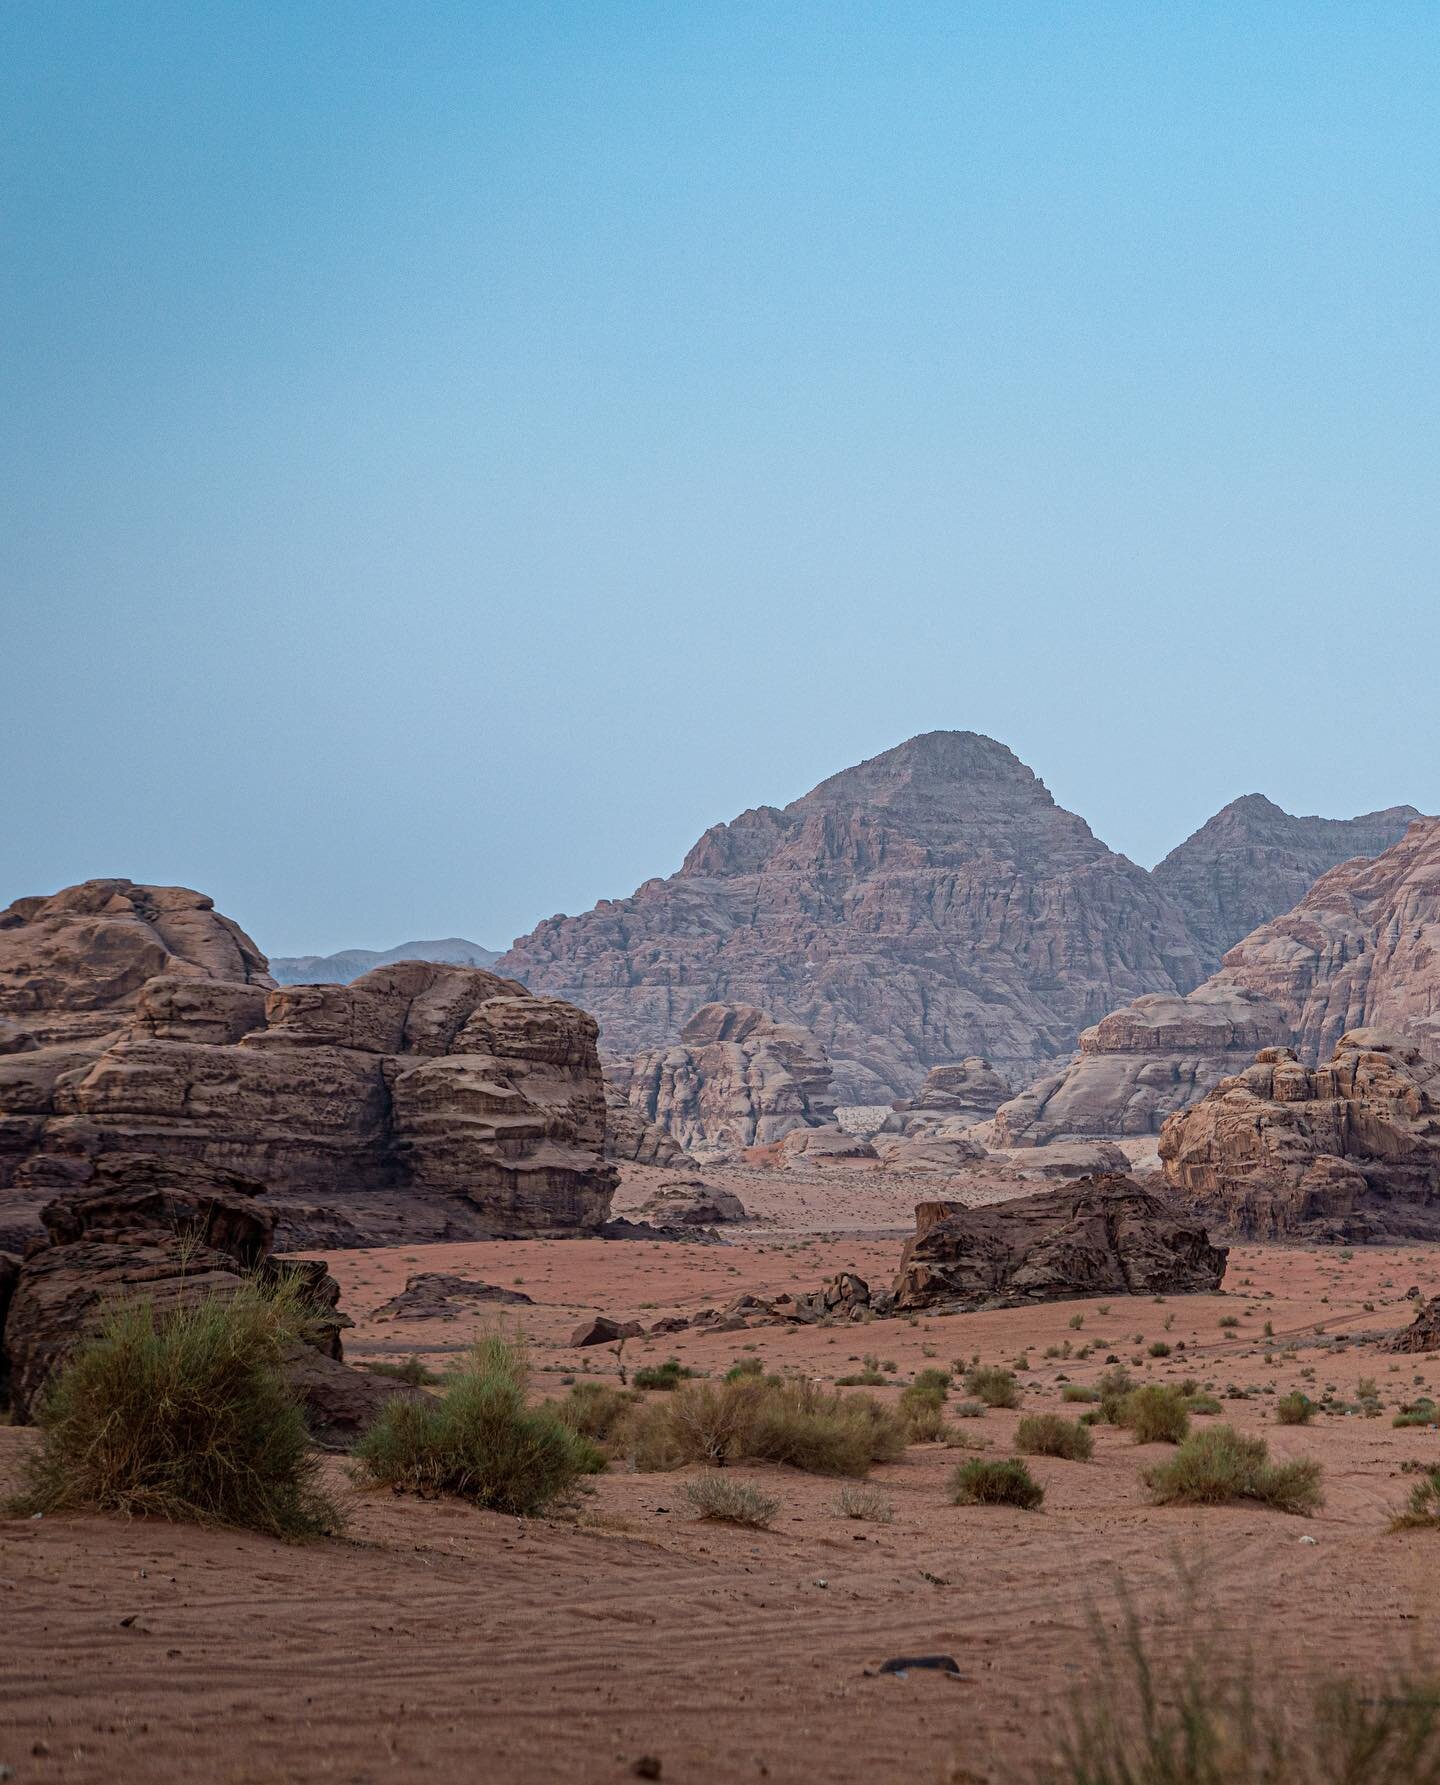 Layered...
👉 swipe for the full panoramic view
.
.
.
🖼 The mountains of Wadi Rum

📸 Captured on a personal adventure.

📷 Shot with @canonme 5D mark IV ( EF 24-70mm, F2.8 ).
.
.
.
Available to shoot your travel adventure or your video/ photo assig